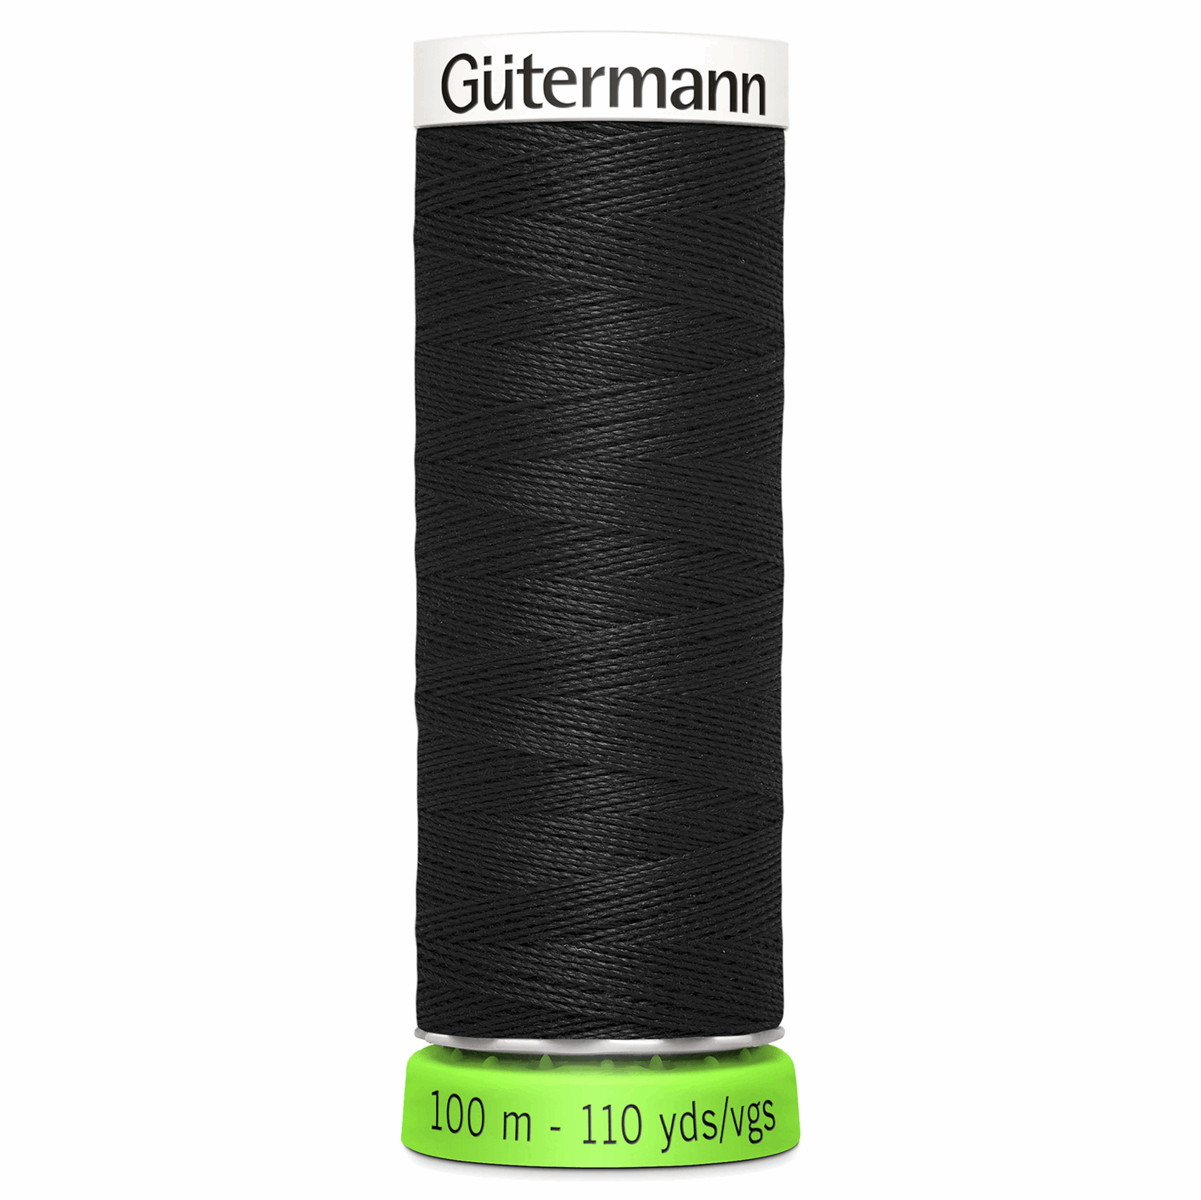 Gutermann Recycled Sew-All Thread rPET 100m 000 Black 